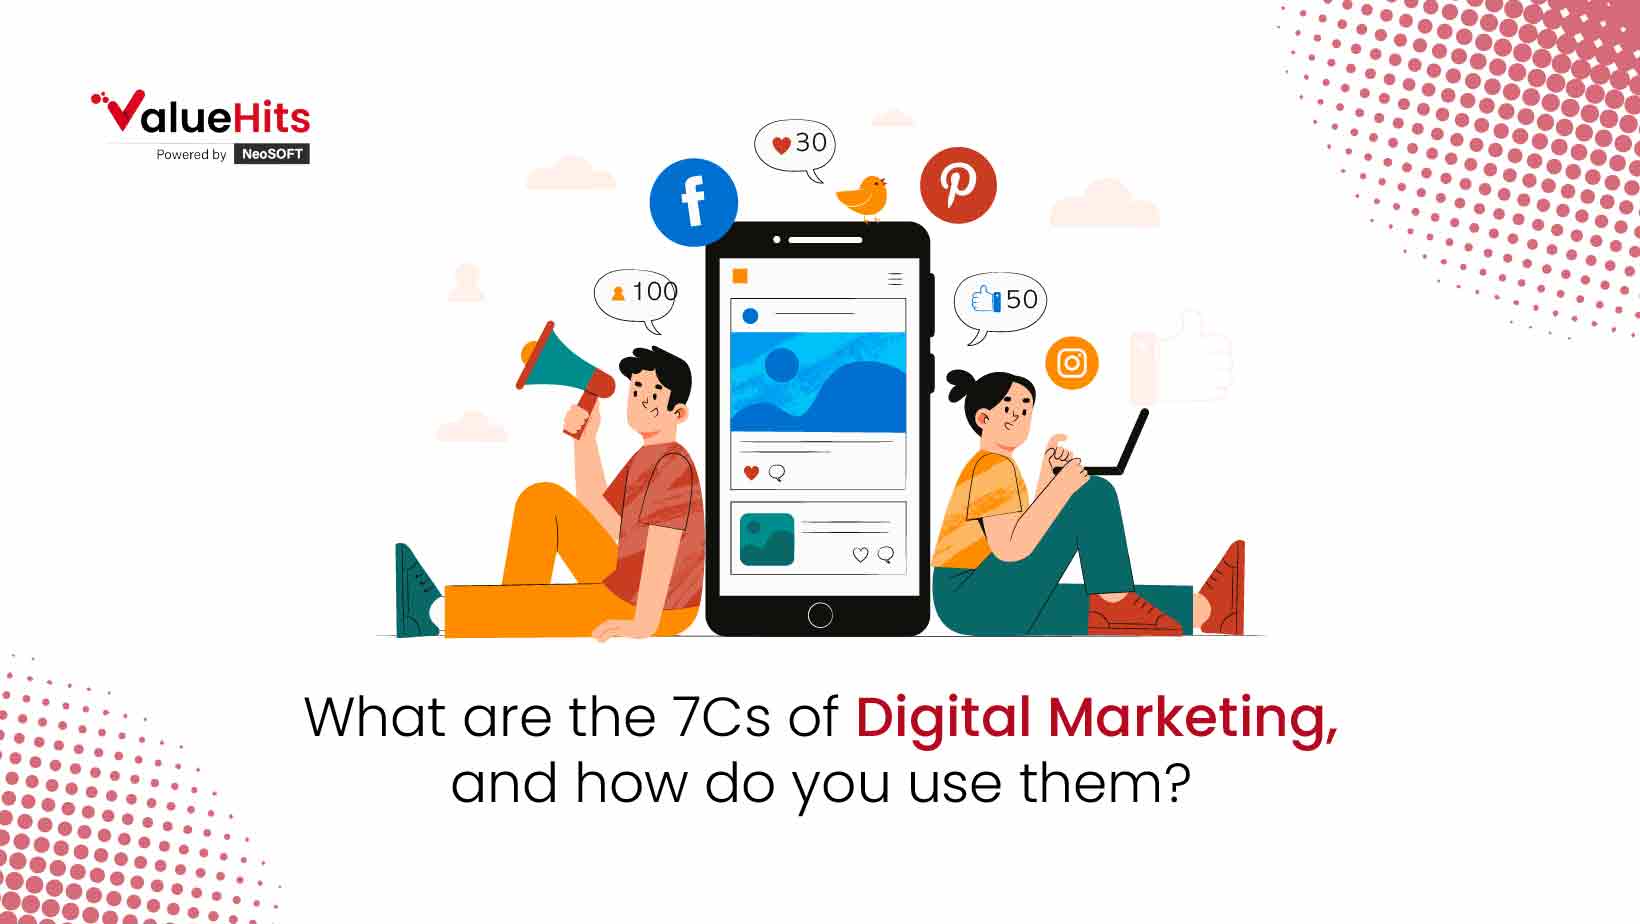 What are the 7Cs of digital marketing, and how do you use them